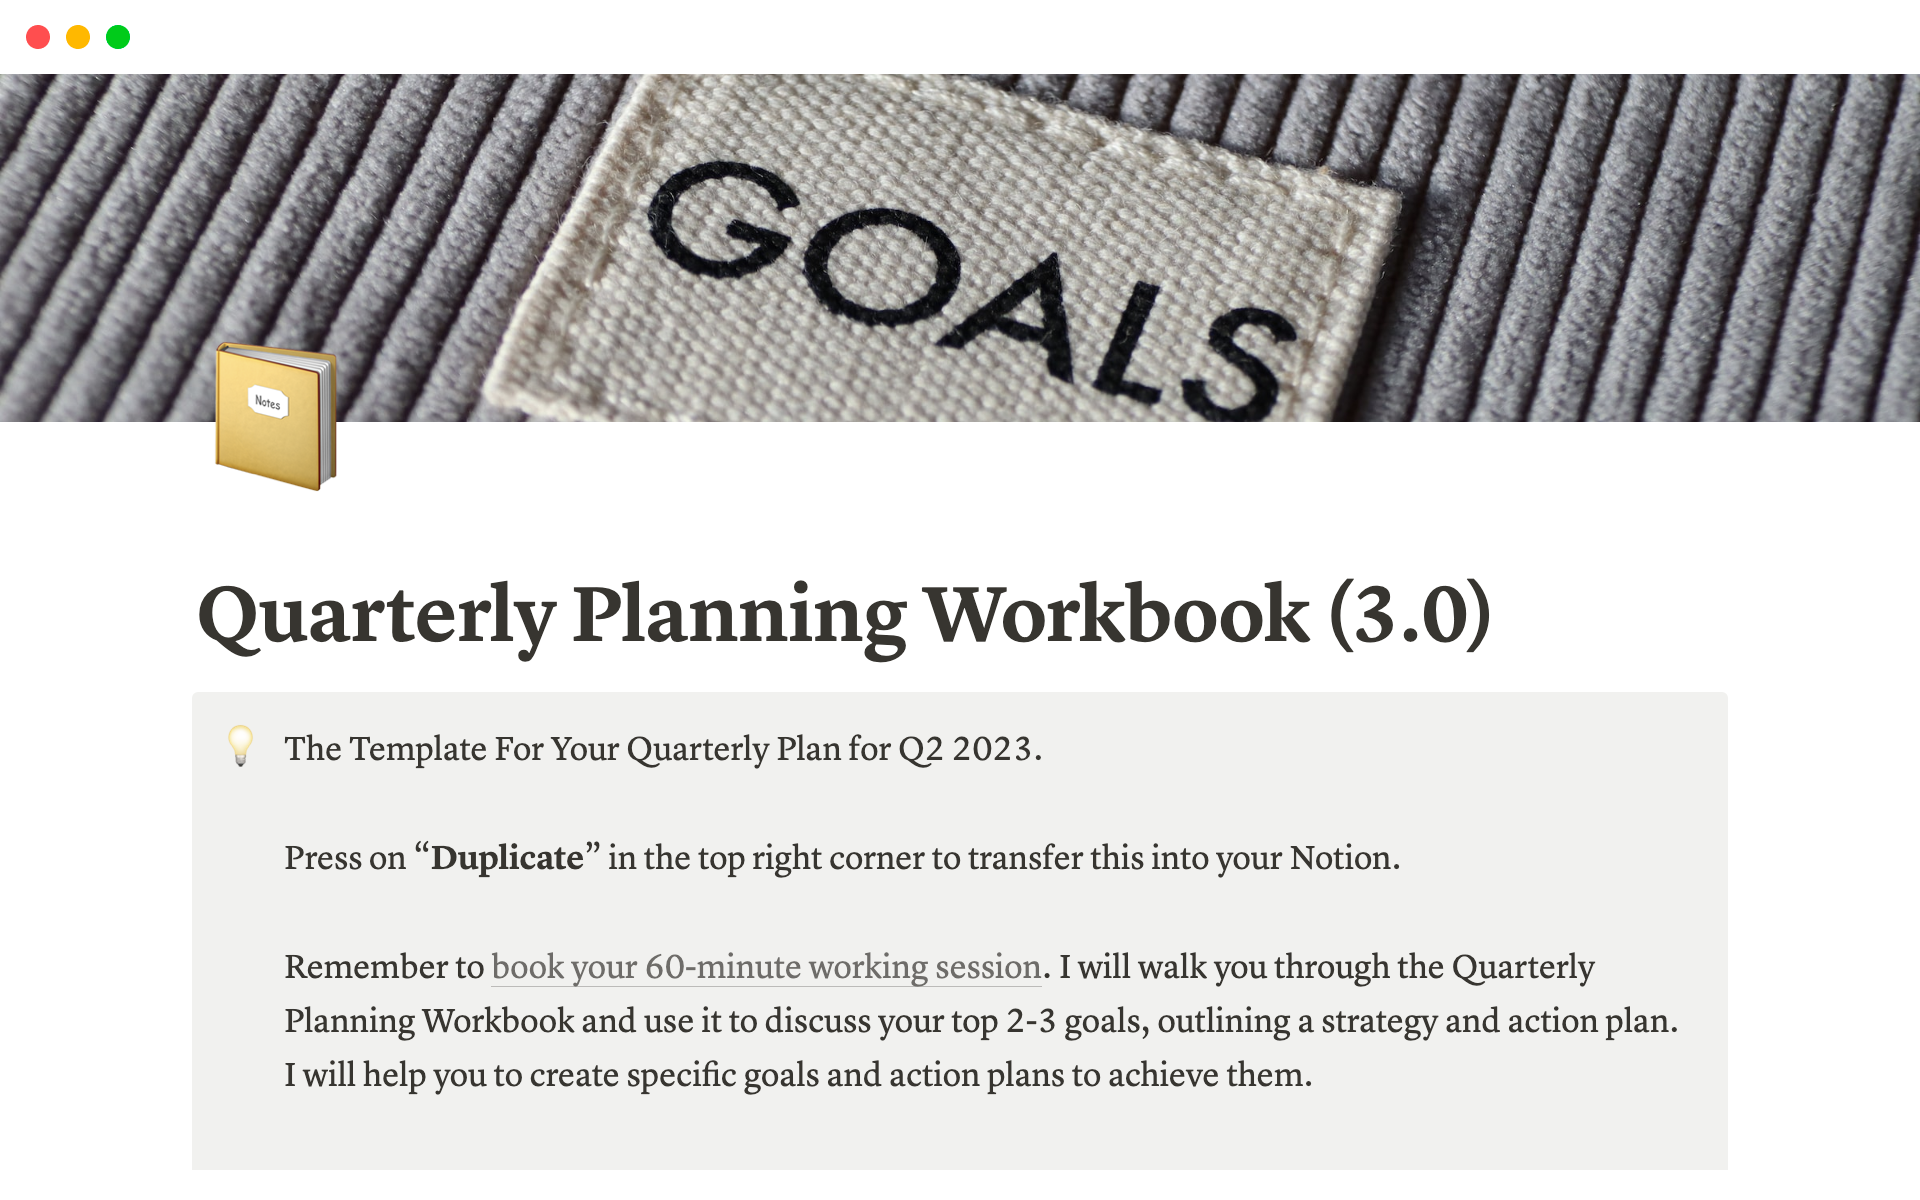 Quarterly Planning Workbook is a Notion-based framework to help you set specific quarterly goals with clear steps, actions & desired outcomes. It also comes with planners to ensure you take daily actions to make progress toward your goals.